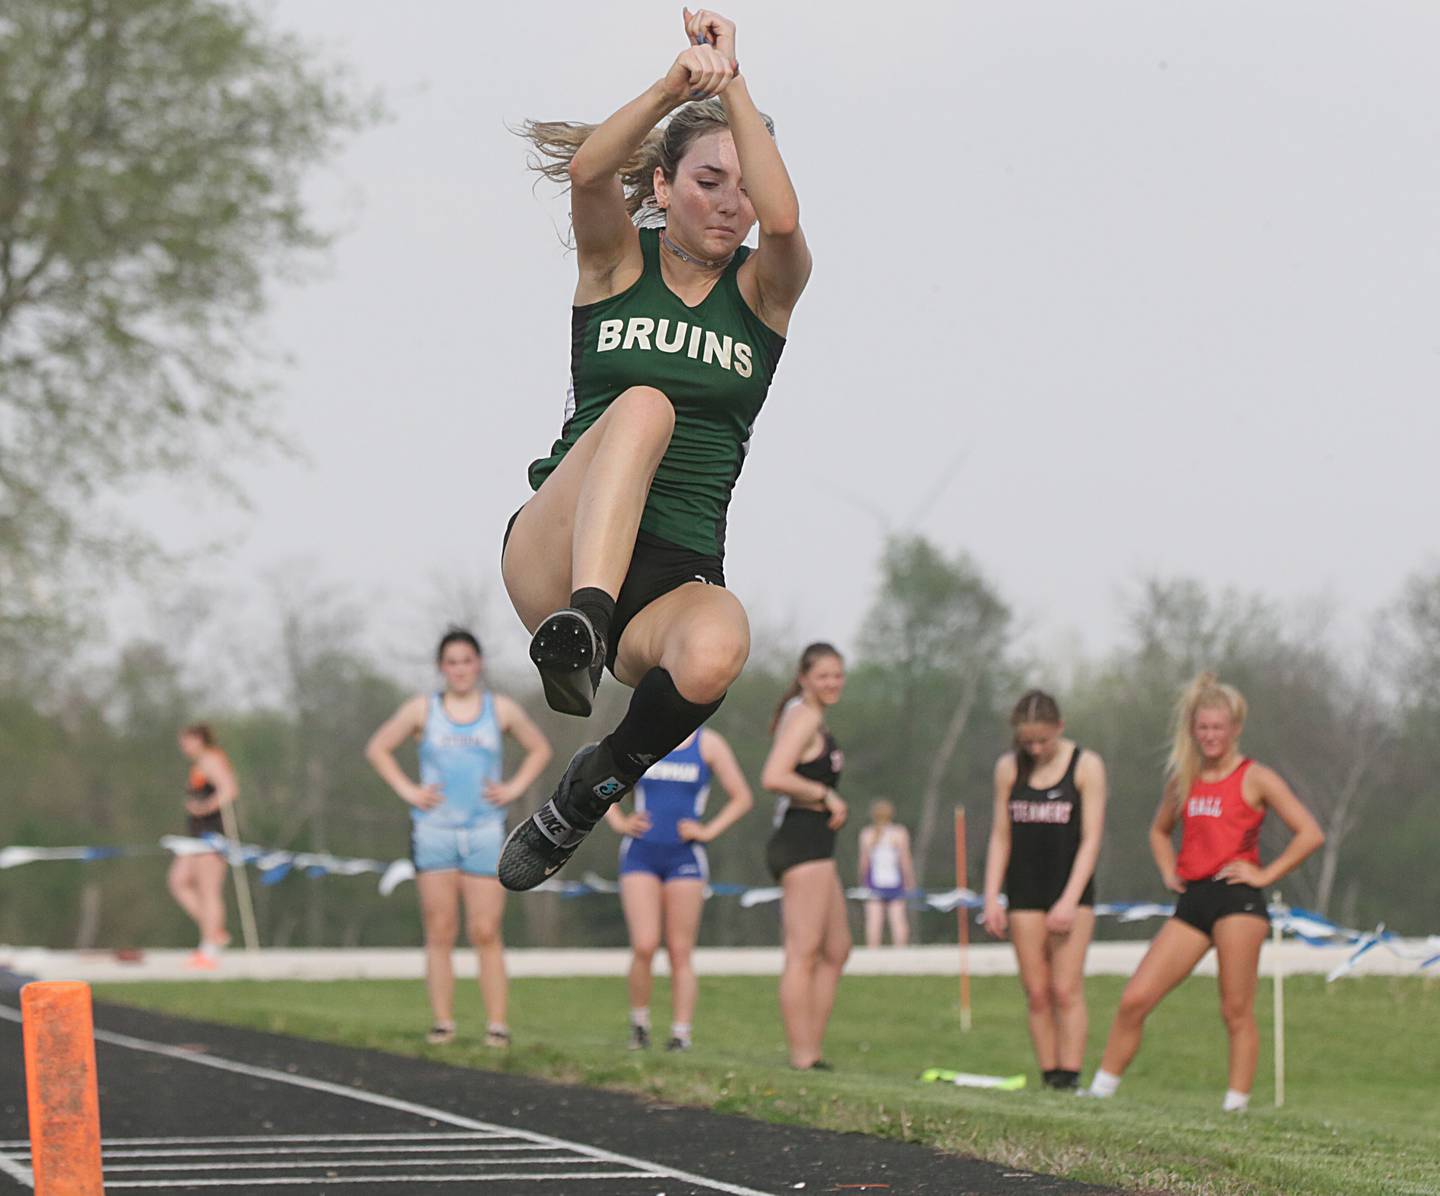 St. Bede's Anna Lopez soars during the long jump in the Class 1A Bureau Valley Sectional on Wednesday, May 11, 2022, in Manlius.